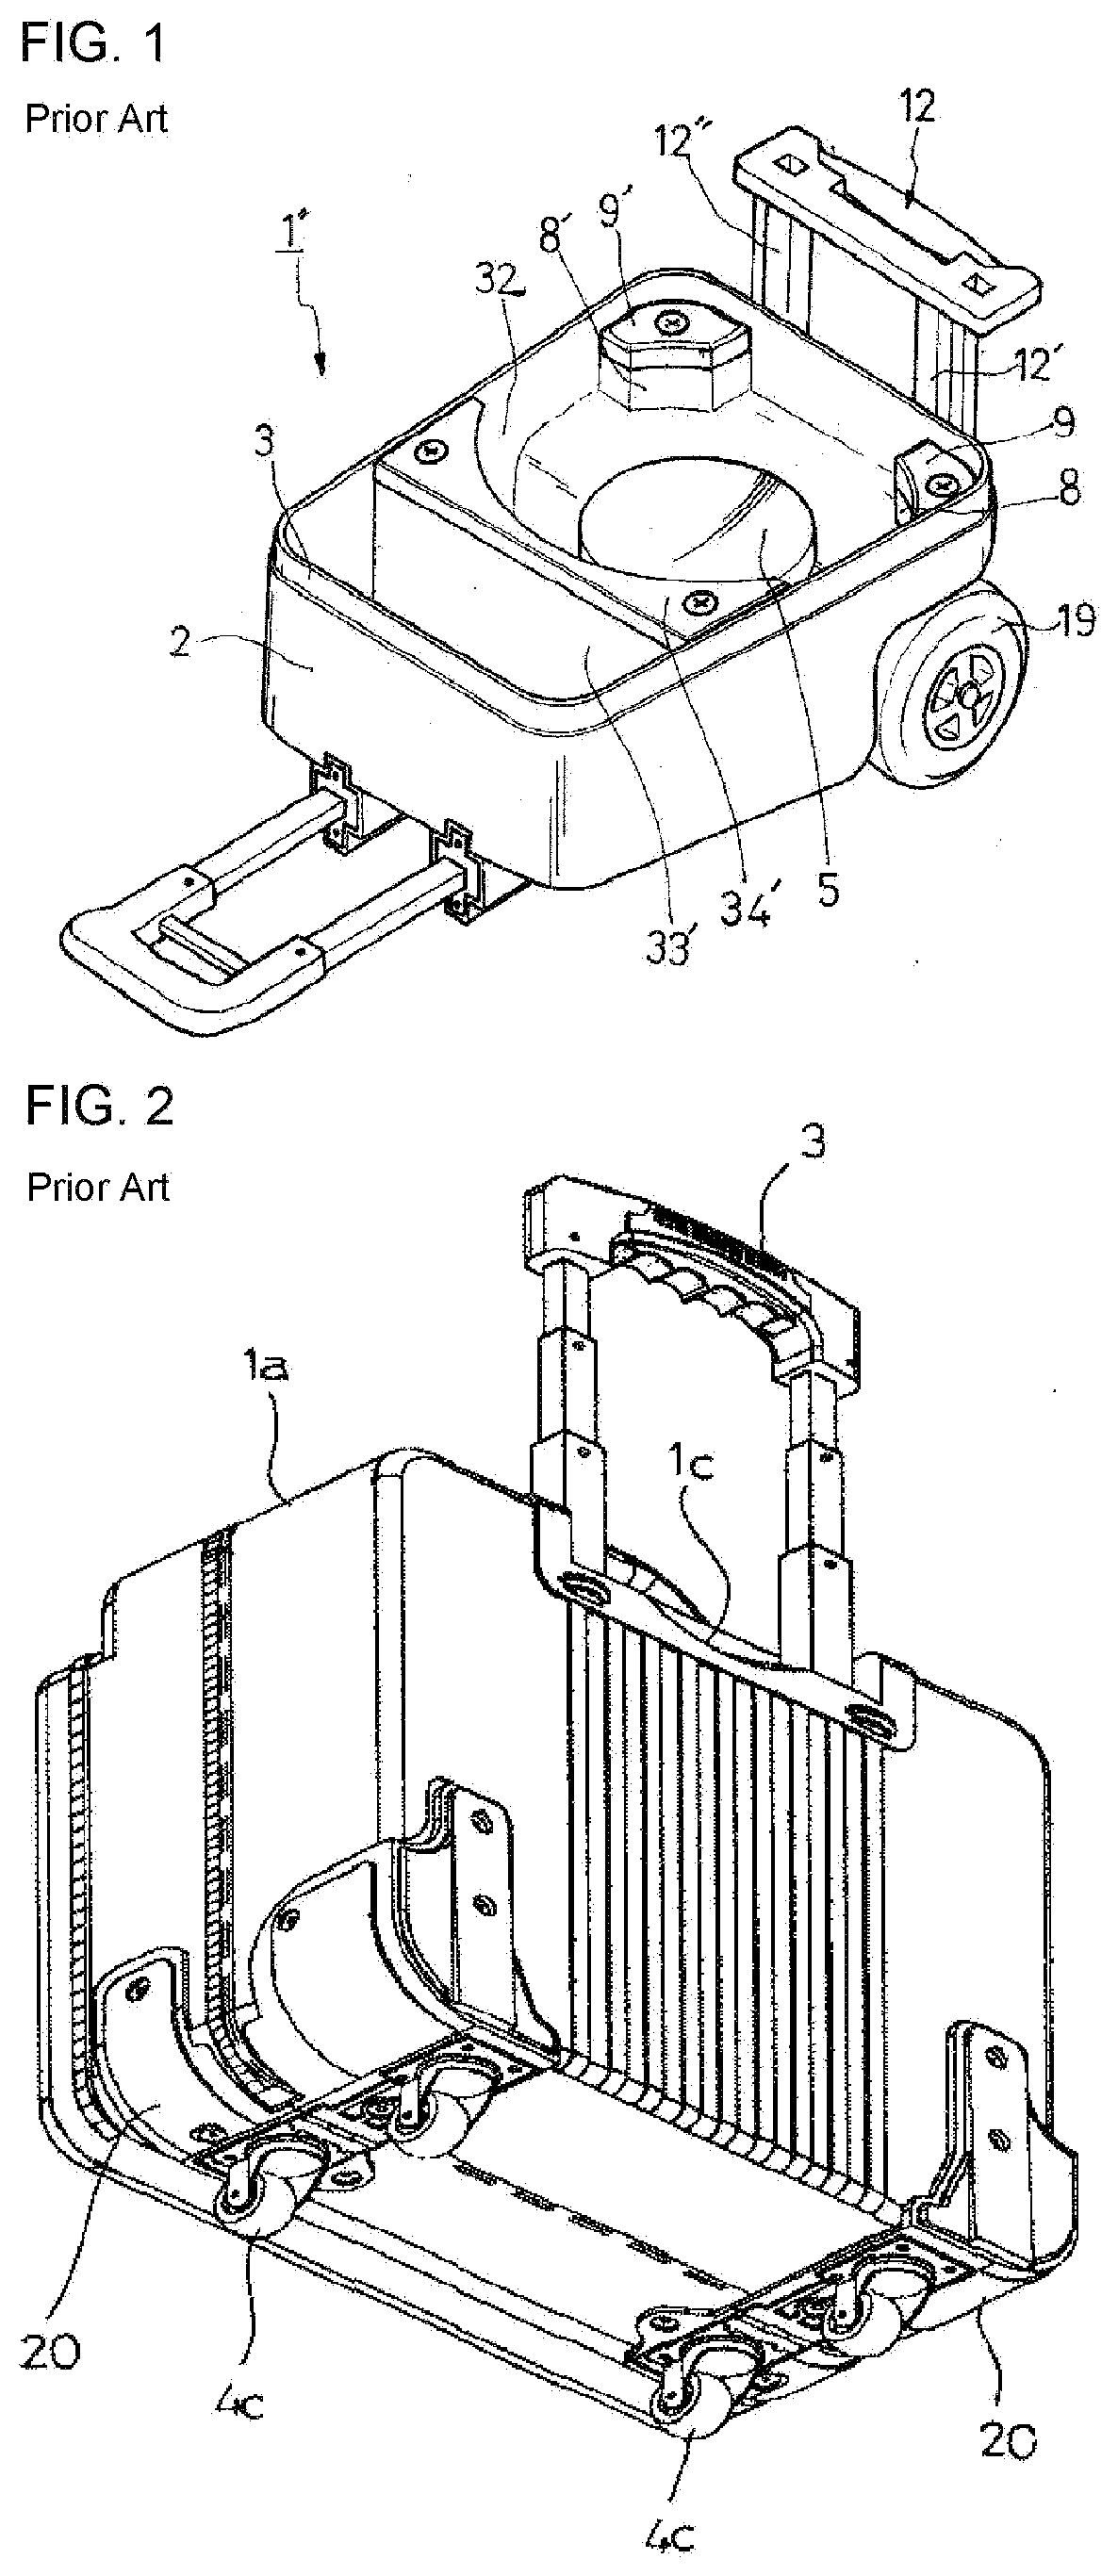 Horizontally movable bowling bag capable of preventing movement of bowling ball